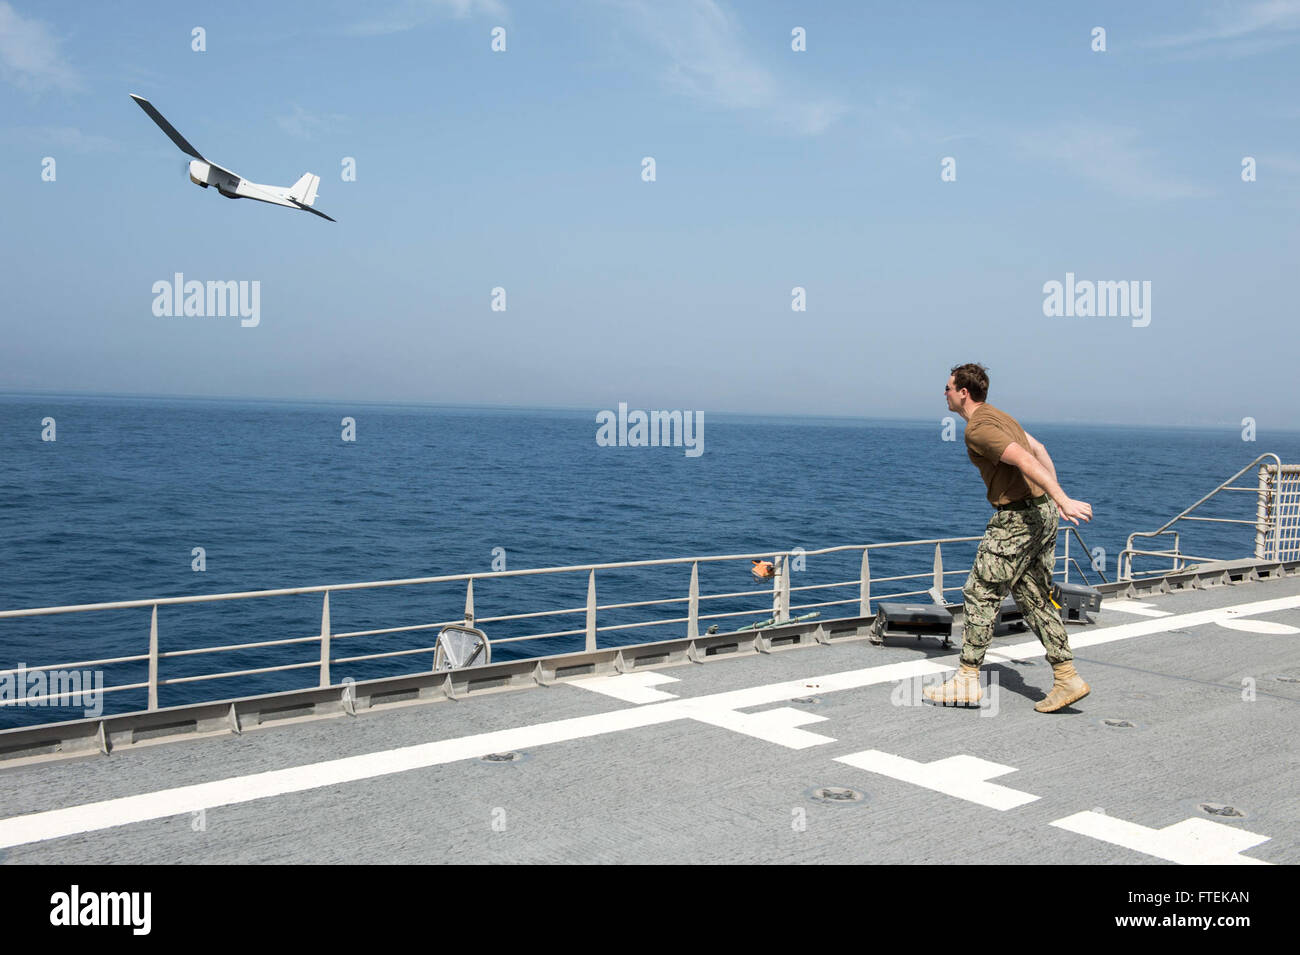 150116-N-JP249-066 ATLANTIC OCEAN (Jan. 16, 2015) Intelligence Specialist 2nd Class Joshua Lesperance, from Spring Valley, Illinois, watches as a Puma Unmanned Aircraft System from the Coastal Riverine Force departs the Military Sealift Command’s joint high-speed vessel USNS Spearhead (JHSV 1) Jan. 16, 2015. Spearhead is on a scheduled deployment to the U.S. 6th Fleet area of operations in support of the international collaborative capacity-building program Africa Partnership Station. (U.S. Navy photo by Mass Communication Specialist 2nd Class Kenan O’Connor/Released) Stock Photo